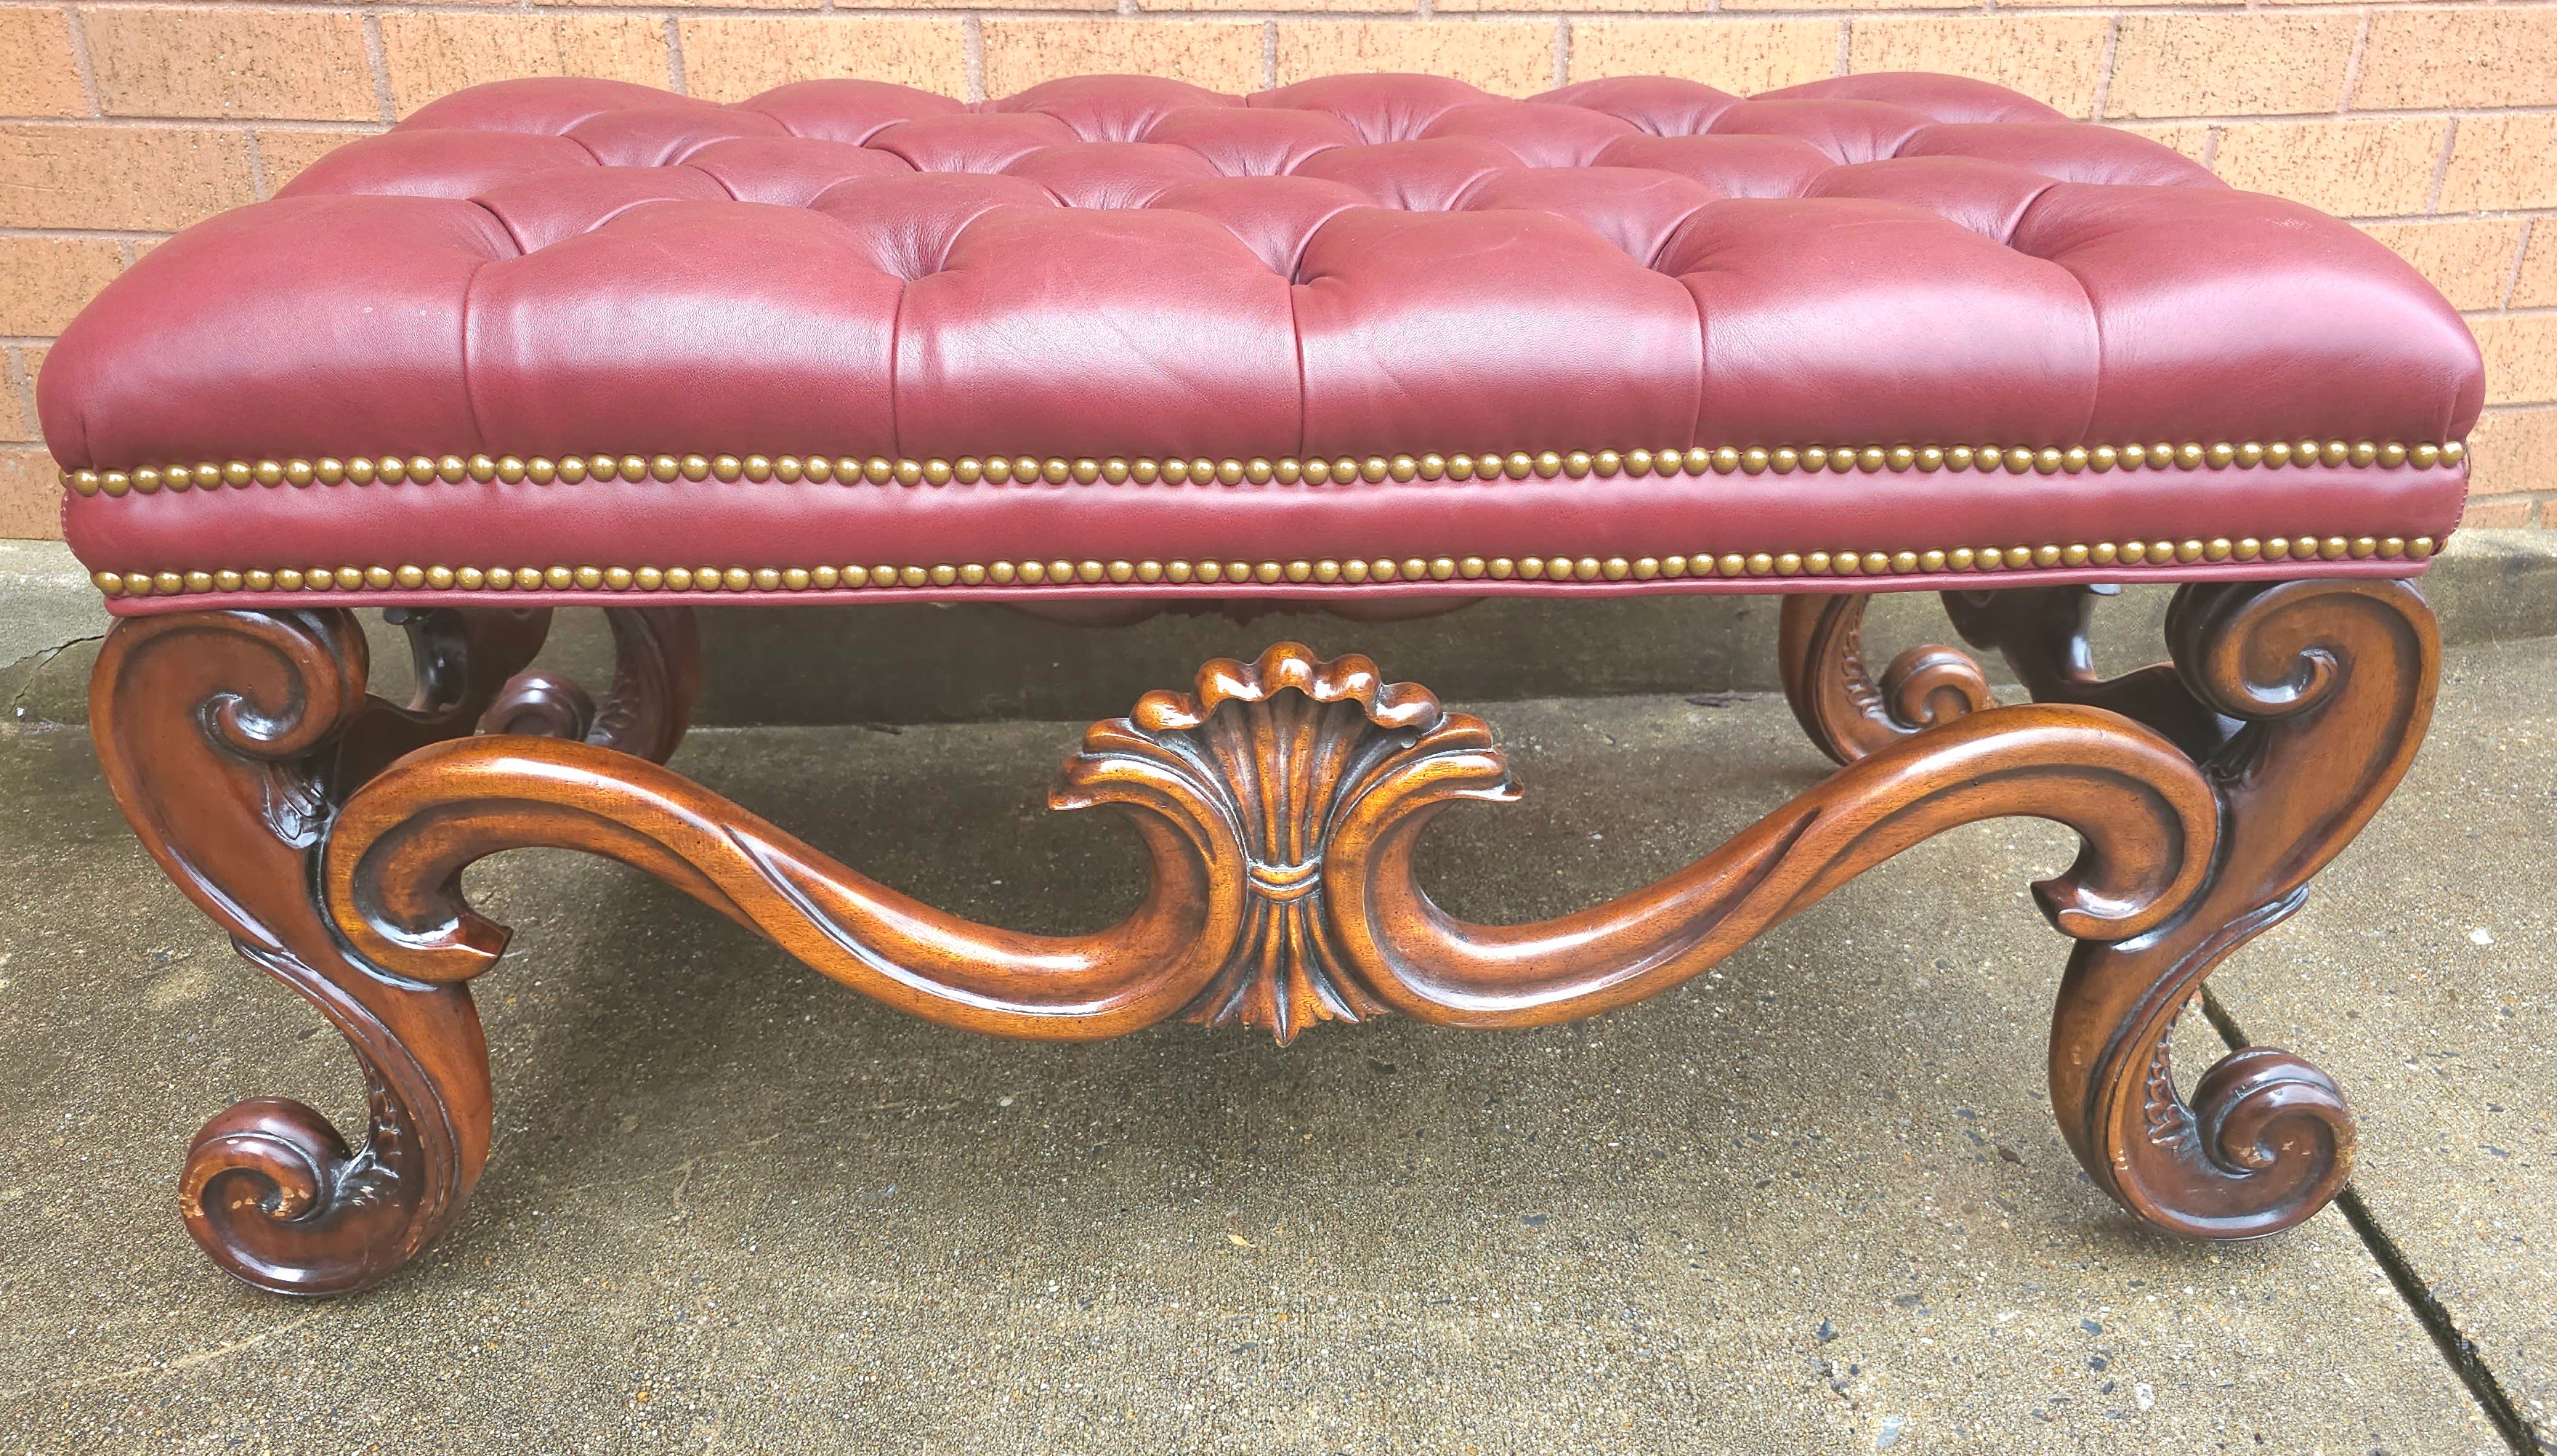 A Whittemore-Cherrill Mahogany Brass Nail Trims and tufted Maroon Top Grain Leather Upholstered Bench / Ottoman in great condition. Measures 37